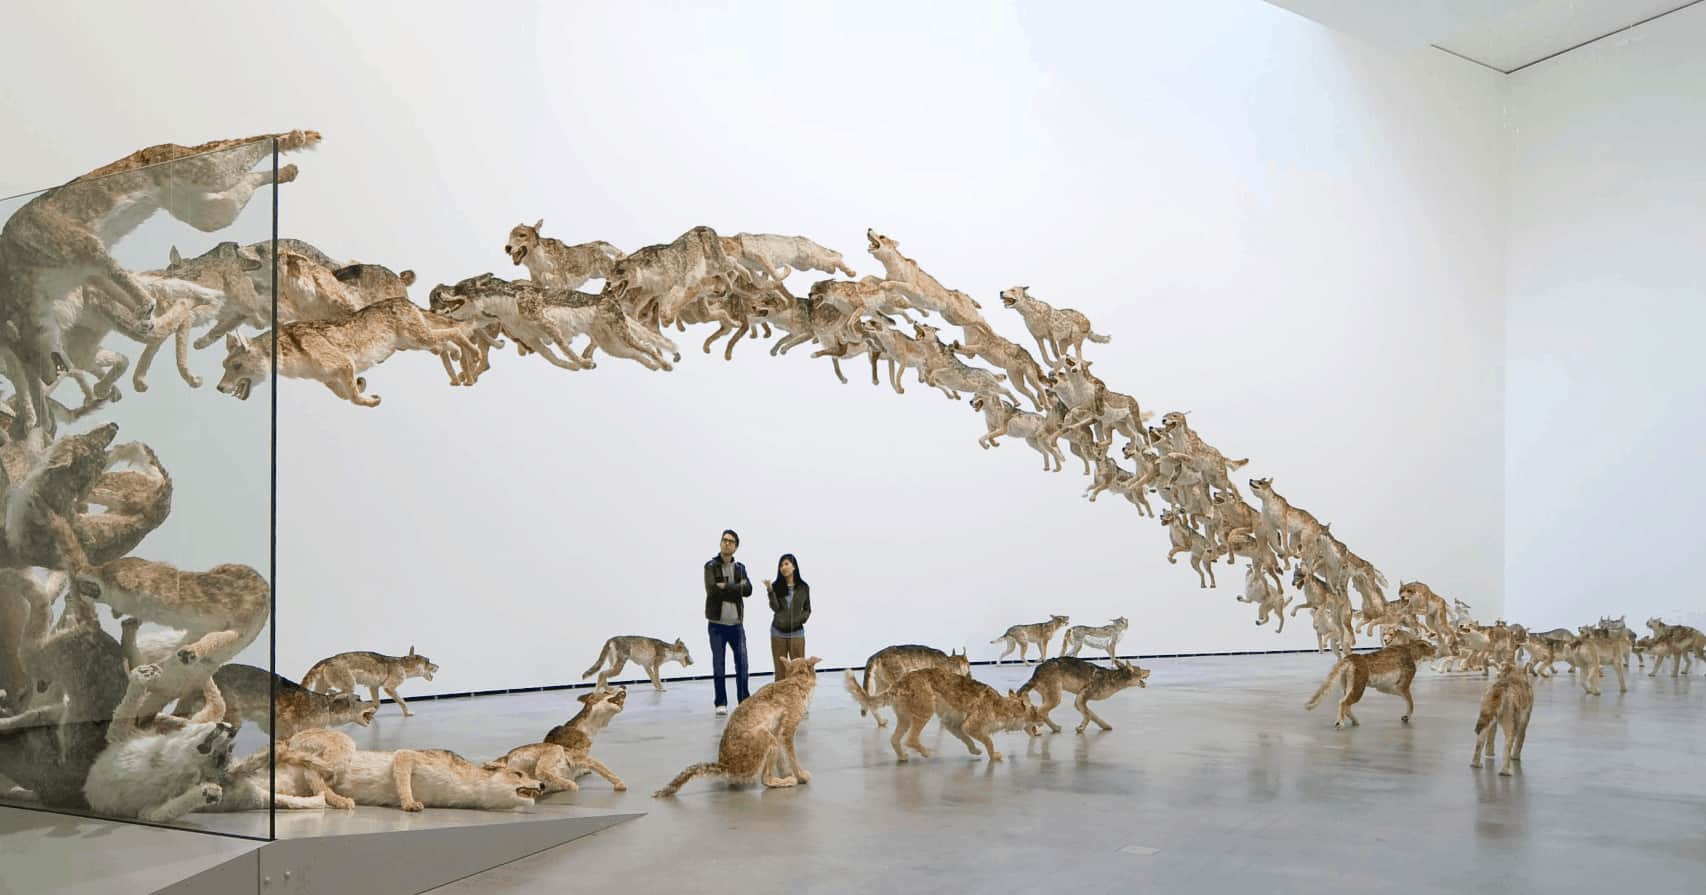 Head On (2006) by Cai Guo-Qiang